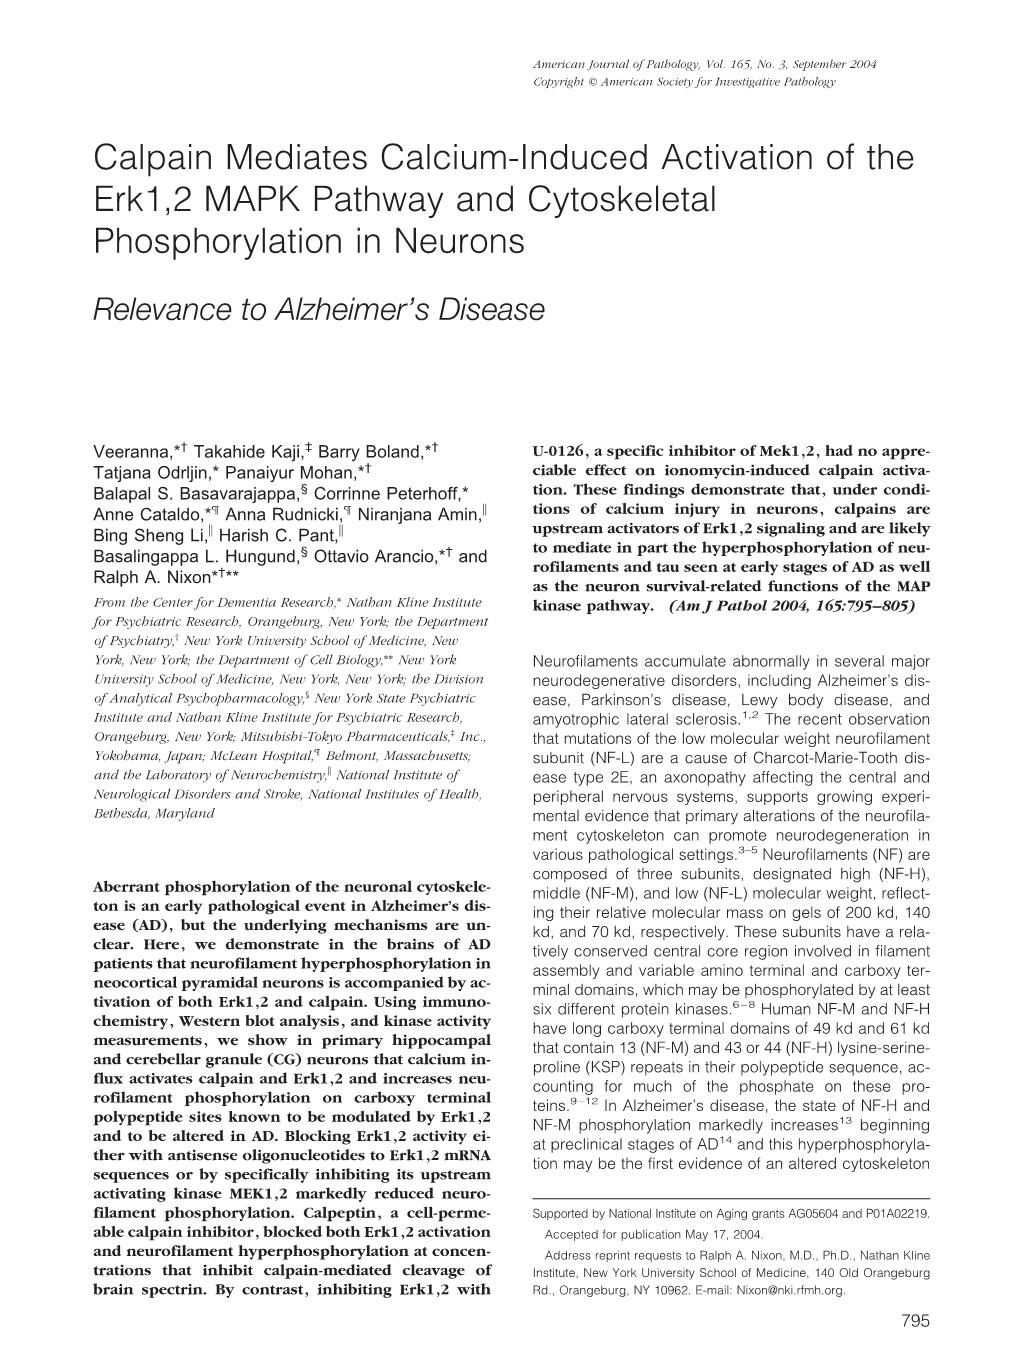 Calpain Mediates Calcium-Induced Activation of the Erk1,2 MAPK Pathway and Cytoskeletal Phosphorylation in Neurons